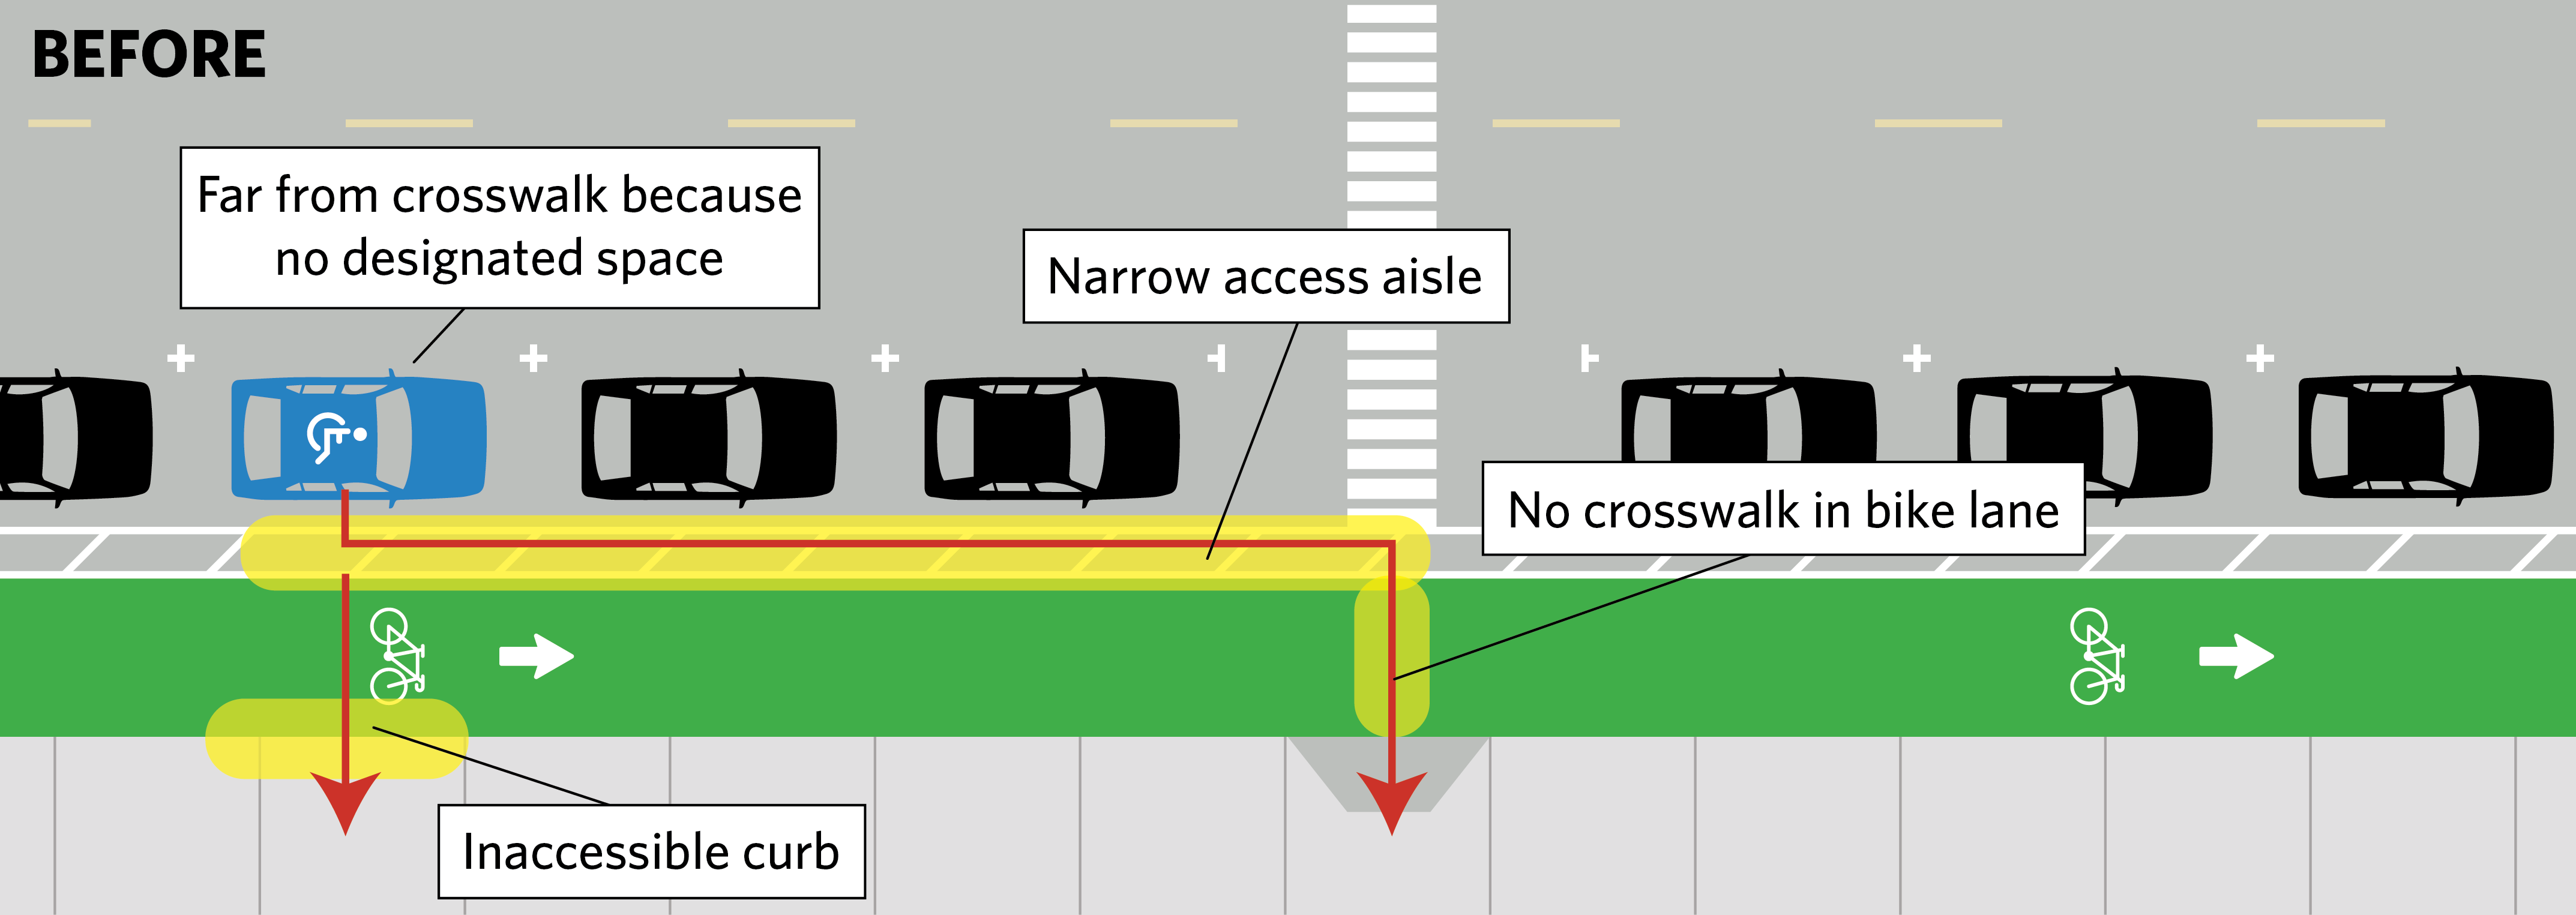 Overhead diagram of a street labeled "Before," with two driving lanes, one parking lane, a narrow access aisle, a bike lane, and a sidewalk. There is a crosswalk on the street, but it ends at the access aisle. There is a curb cut where the crosswalk would meet the sidewalk. There is an accessible parking spot in the parking lane, but it is located far from the crosswalk. The curb across from the parking spot is inaccessible.